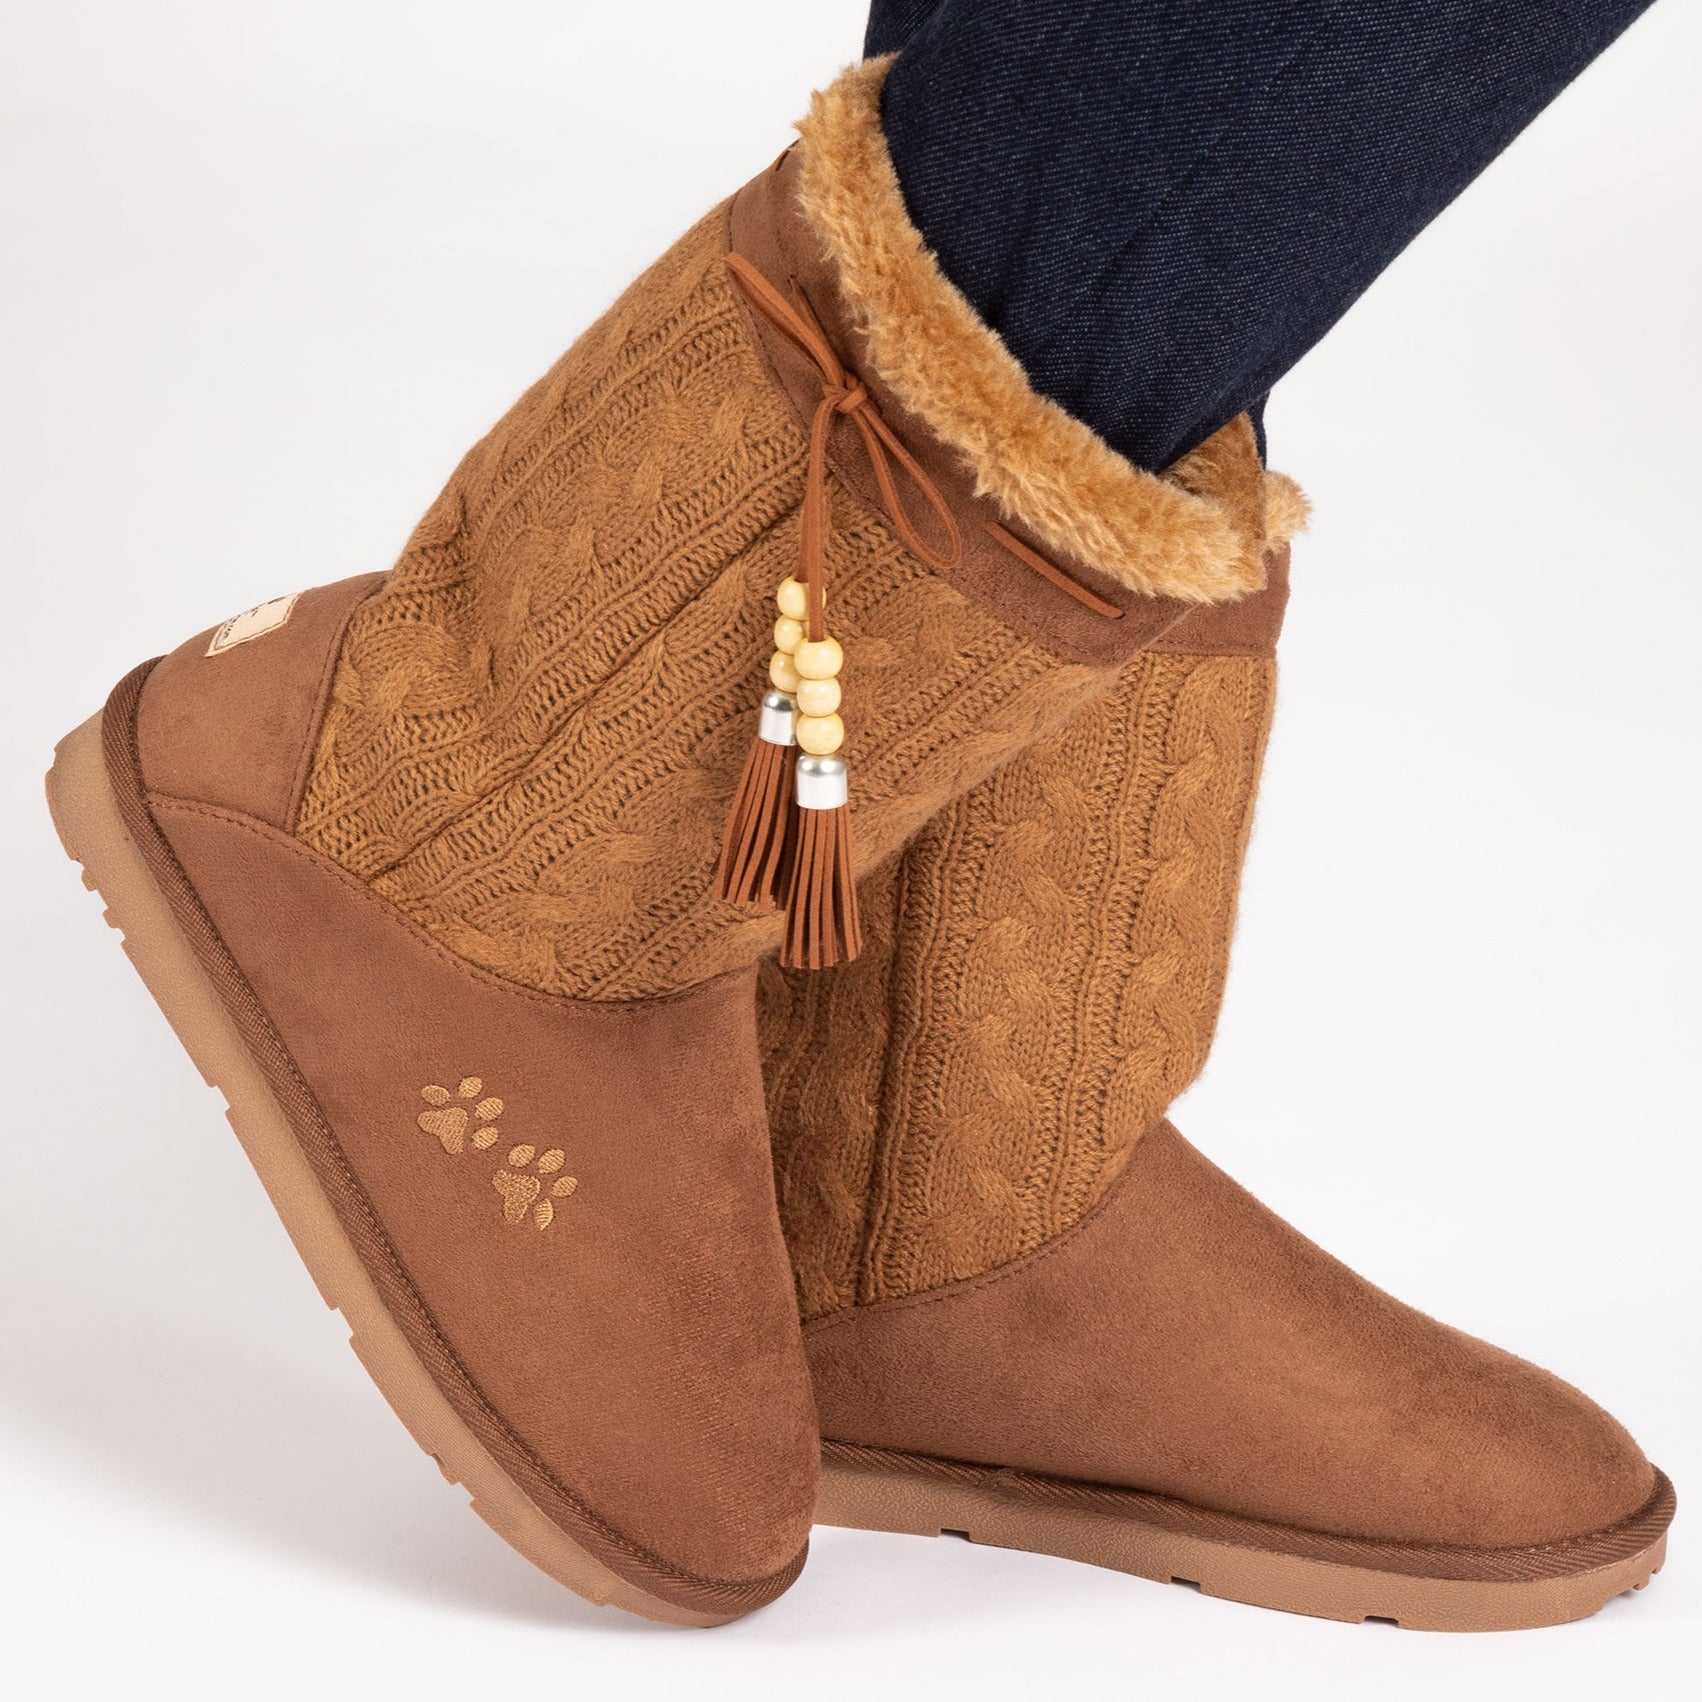 Paw Print Tall Knitted Boots With Beaded Tassels - Tan - 10